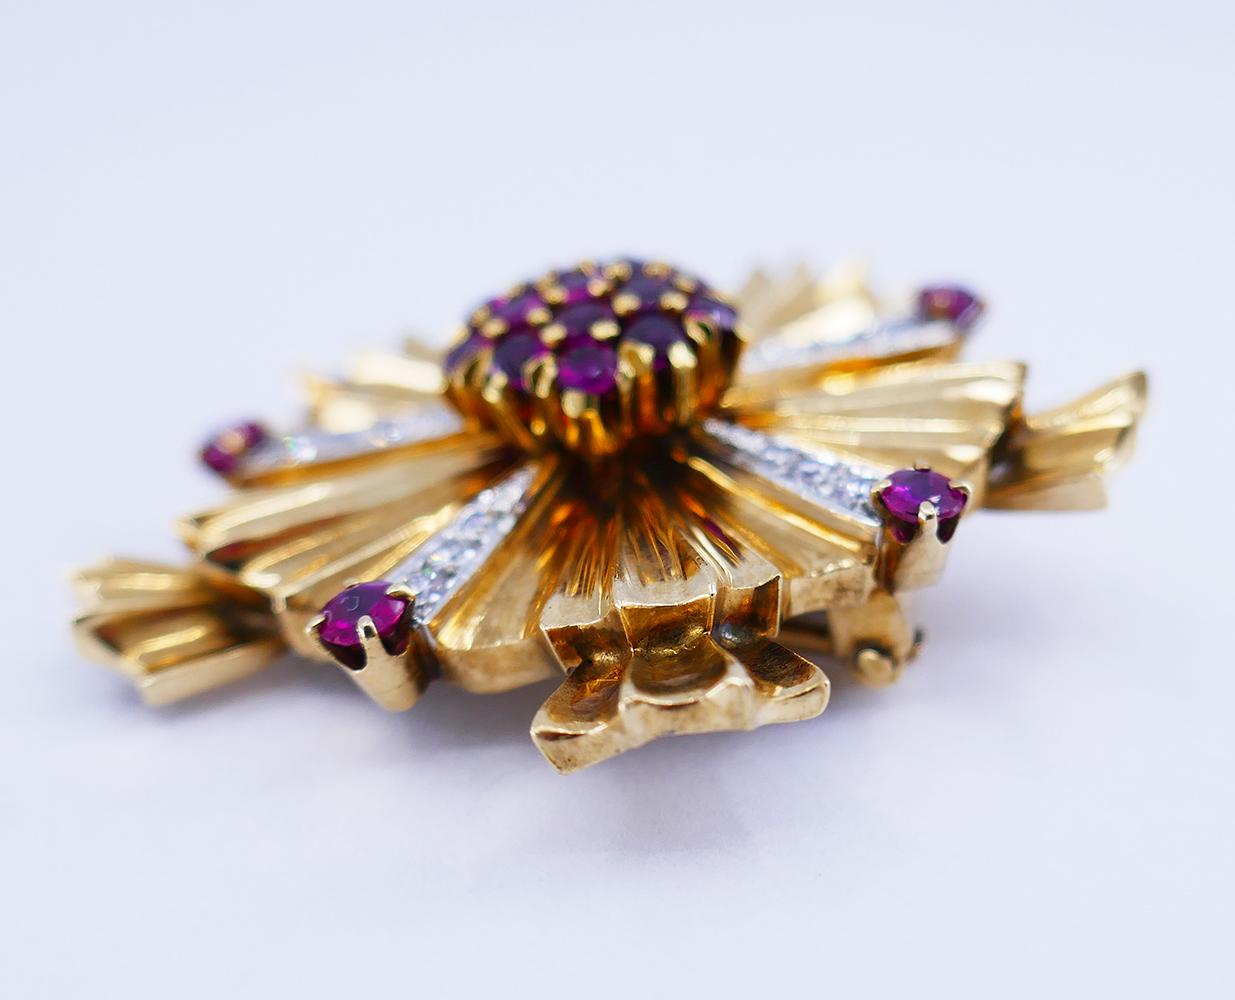 	A Tiffany & Co. Retro ruby and diamond pin brooch made of 14 karat gold.
	This starburst motif Retro Tiffany brooch is crafted of corrugated gold. This technique was very common in the 1940s when this retro gold brooch was created.
	The rubies are